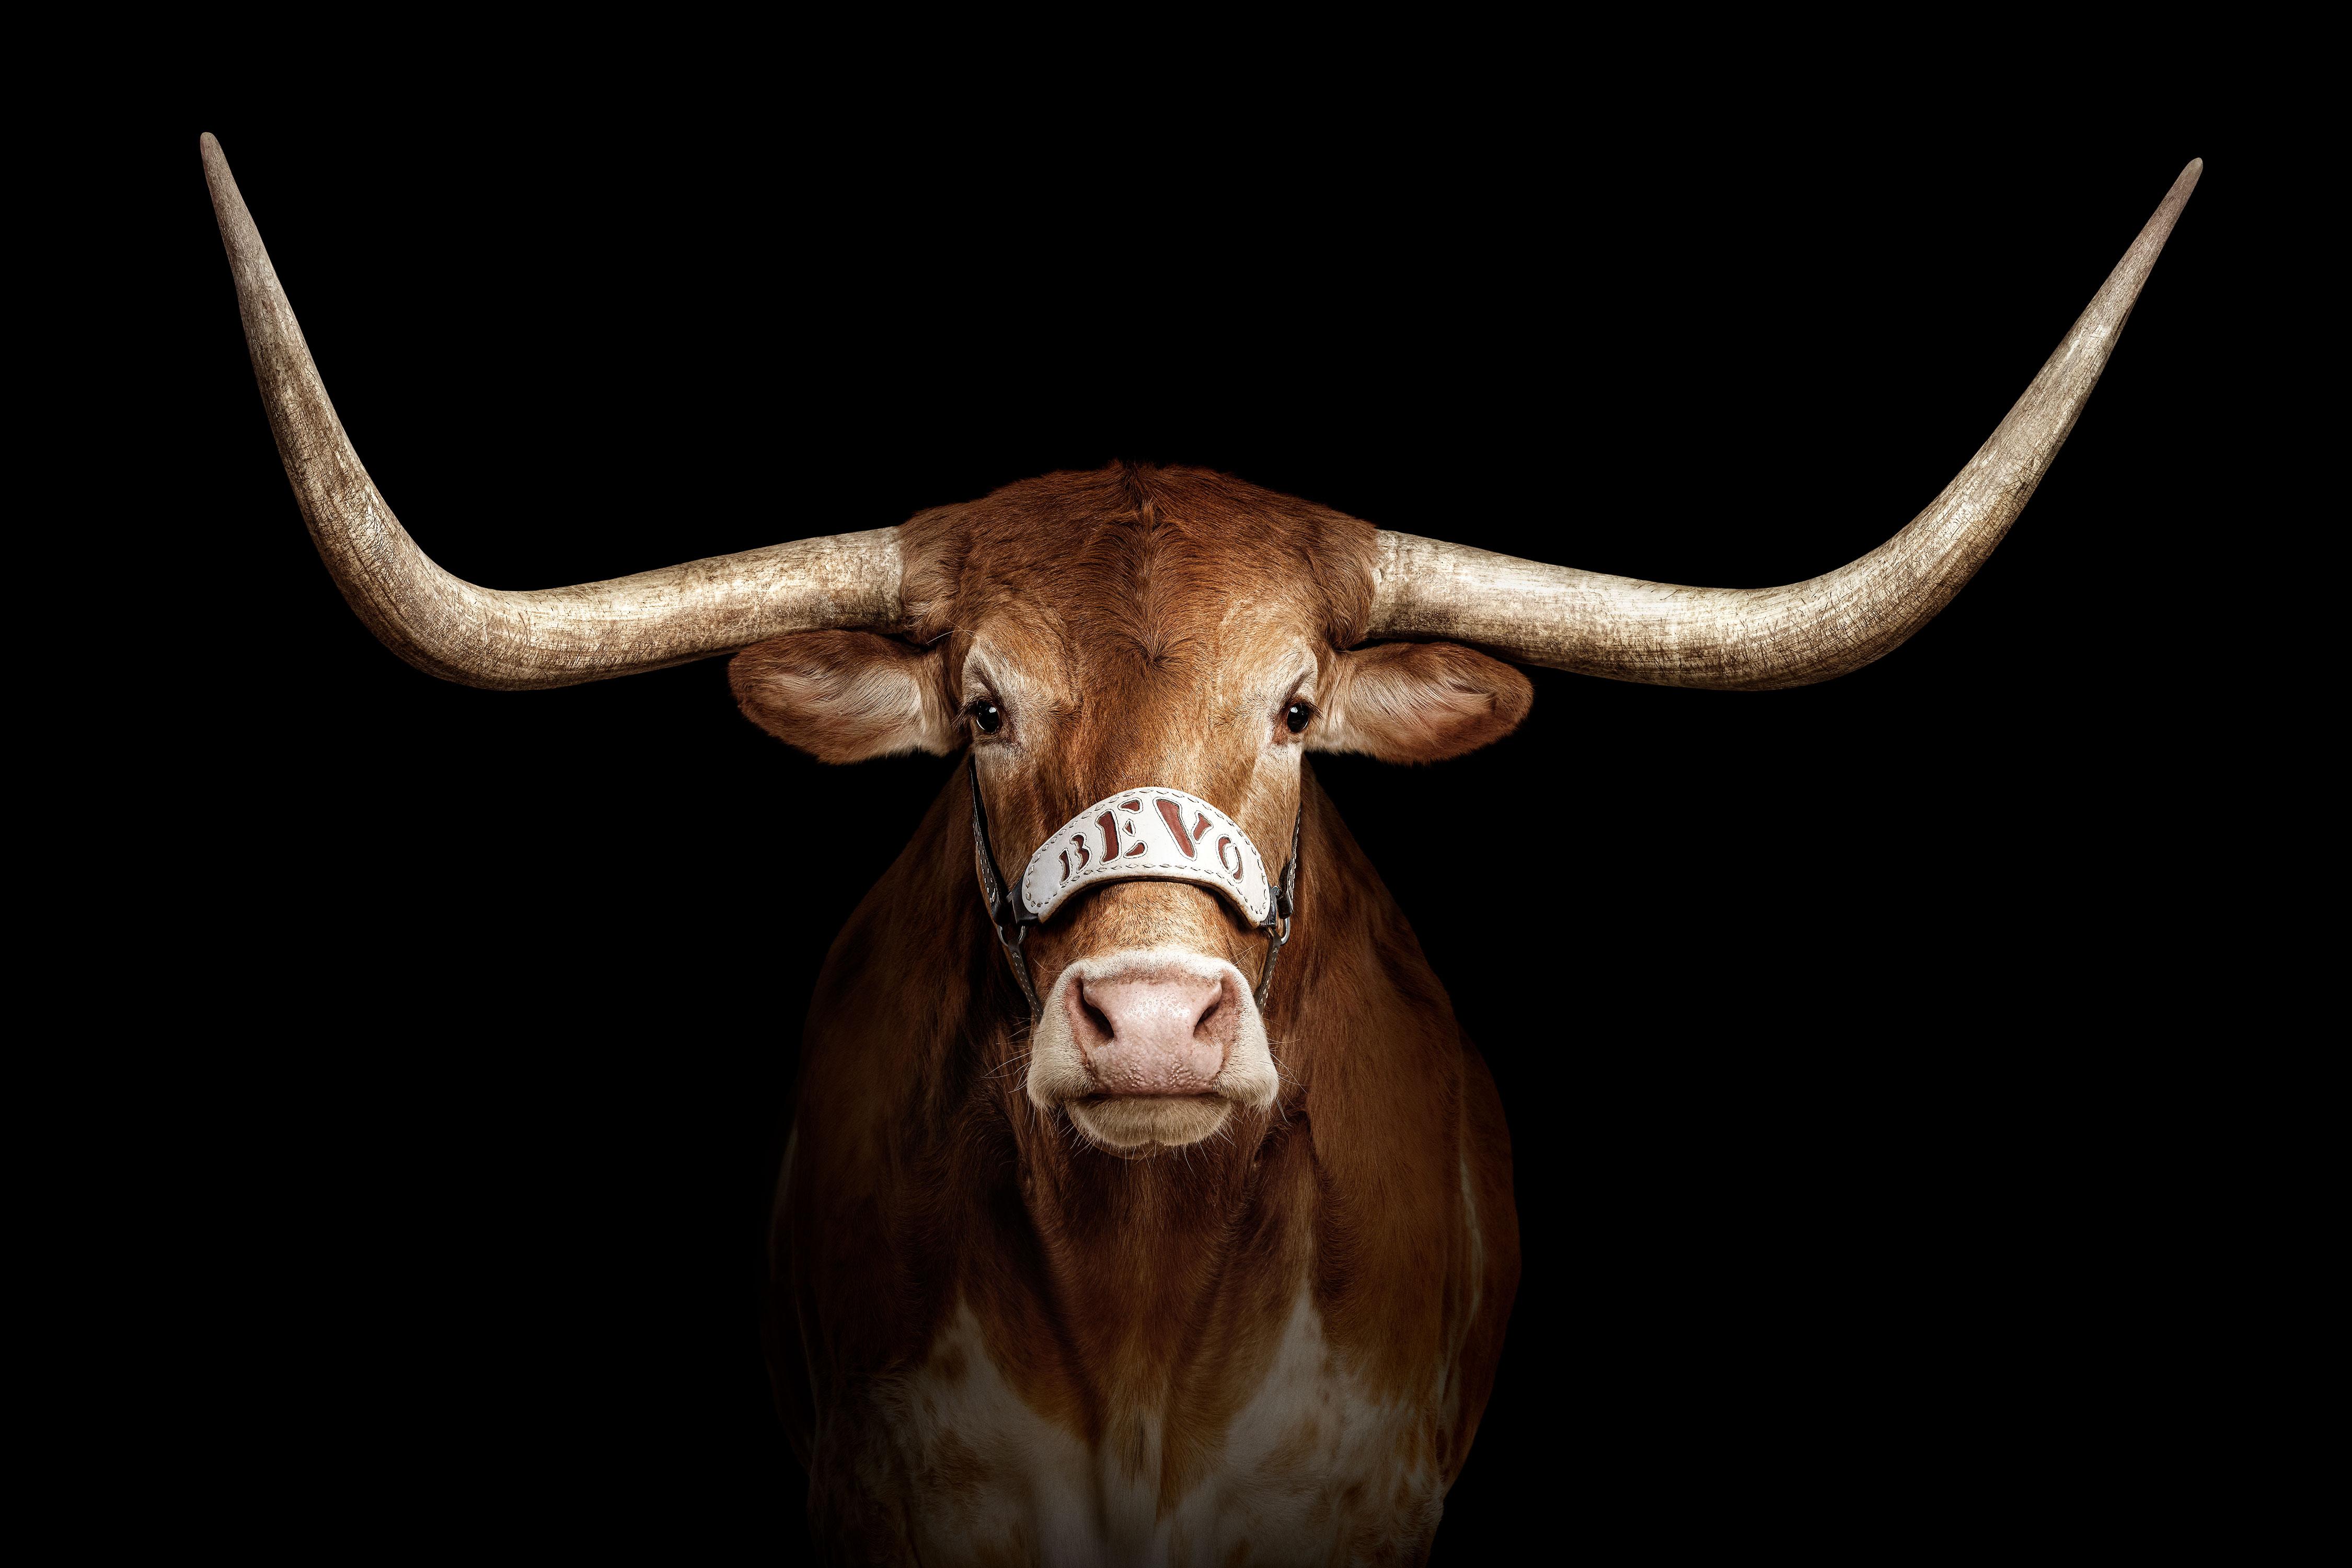 Randal Ford - Bevo XV on Black, Photography 2022, Printed After